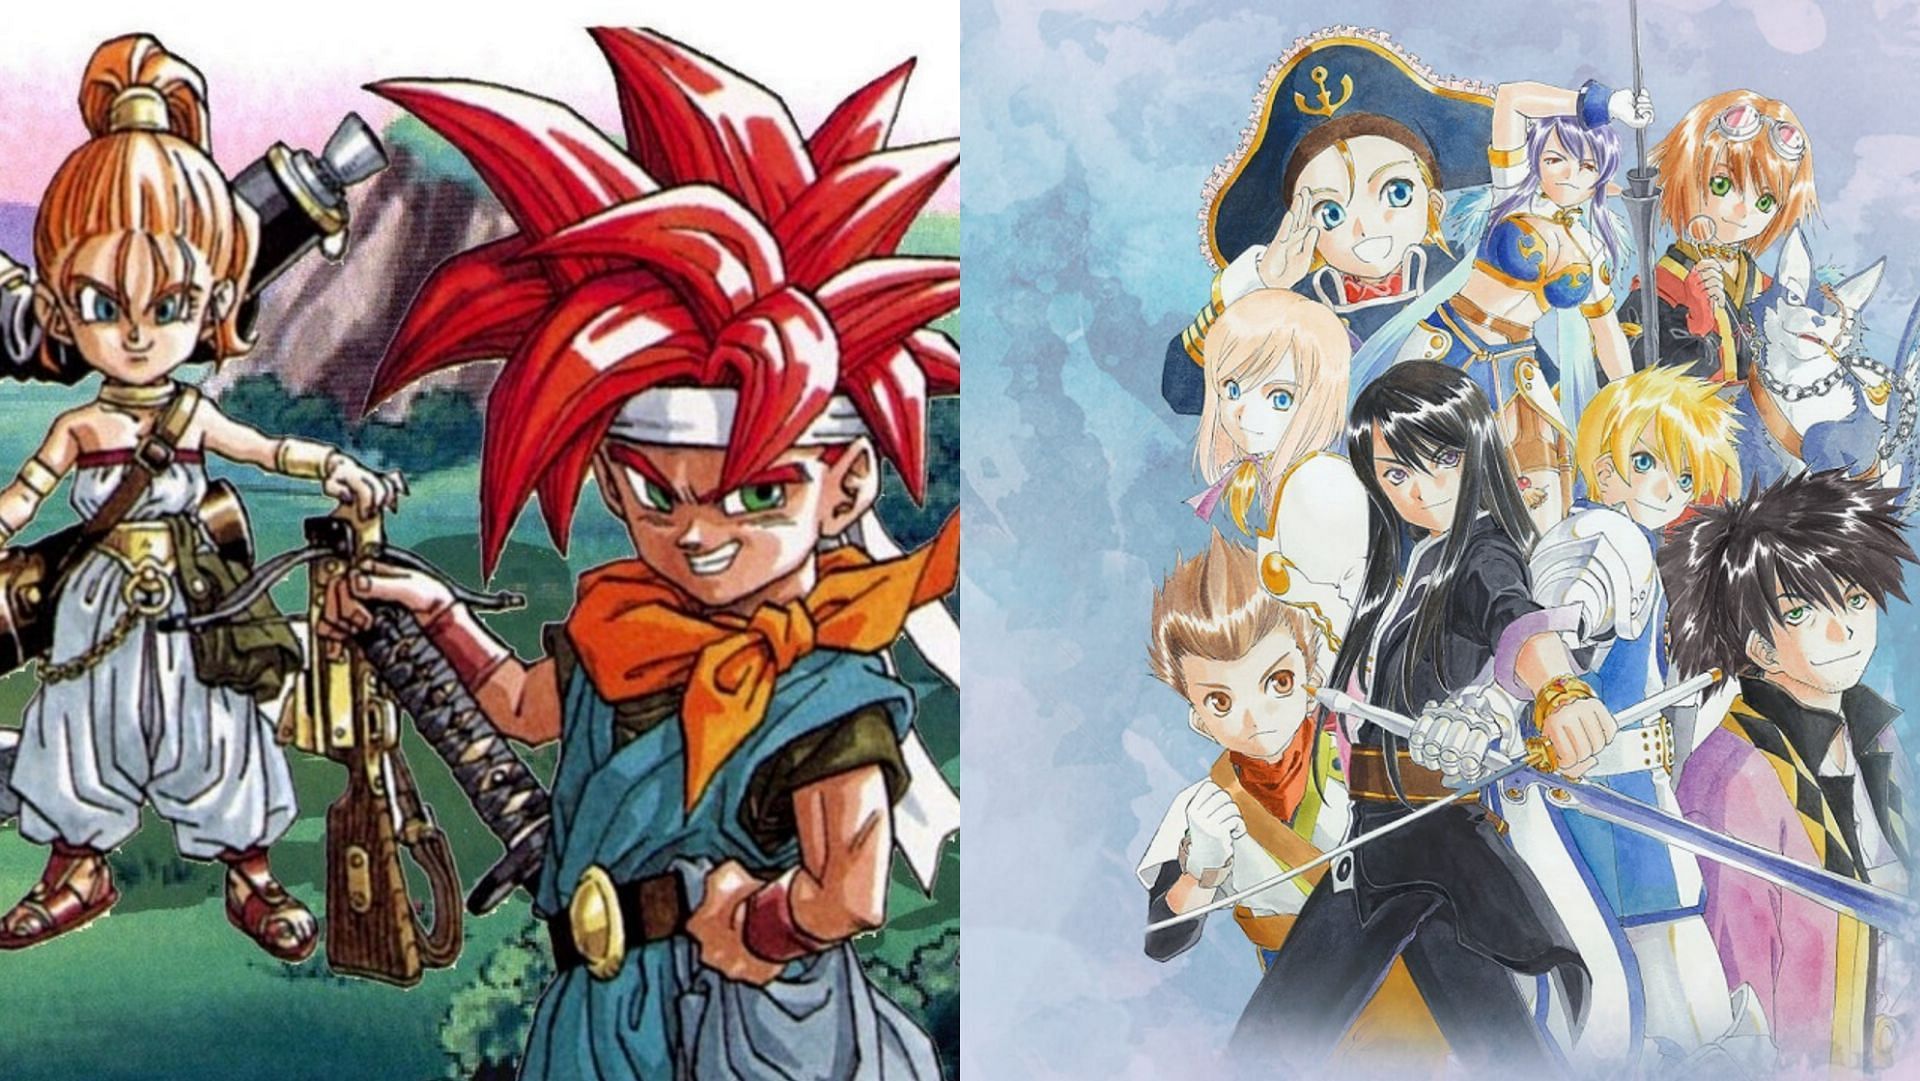 JRPGs are a popular category of game, but which are the ones to focus on this month? (Image via Square Enix and Bandai Namco)